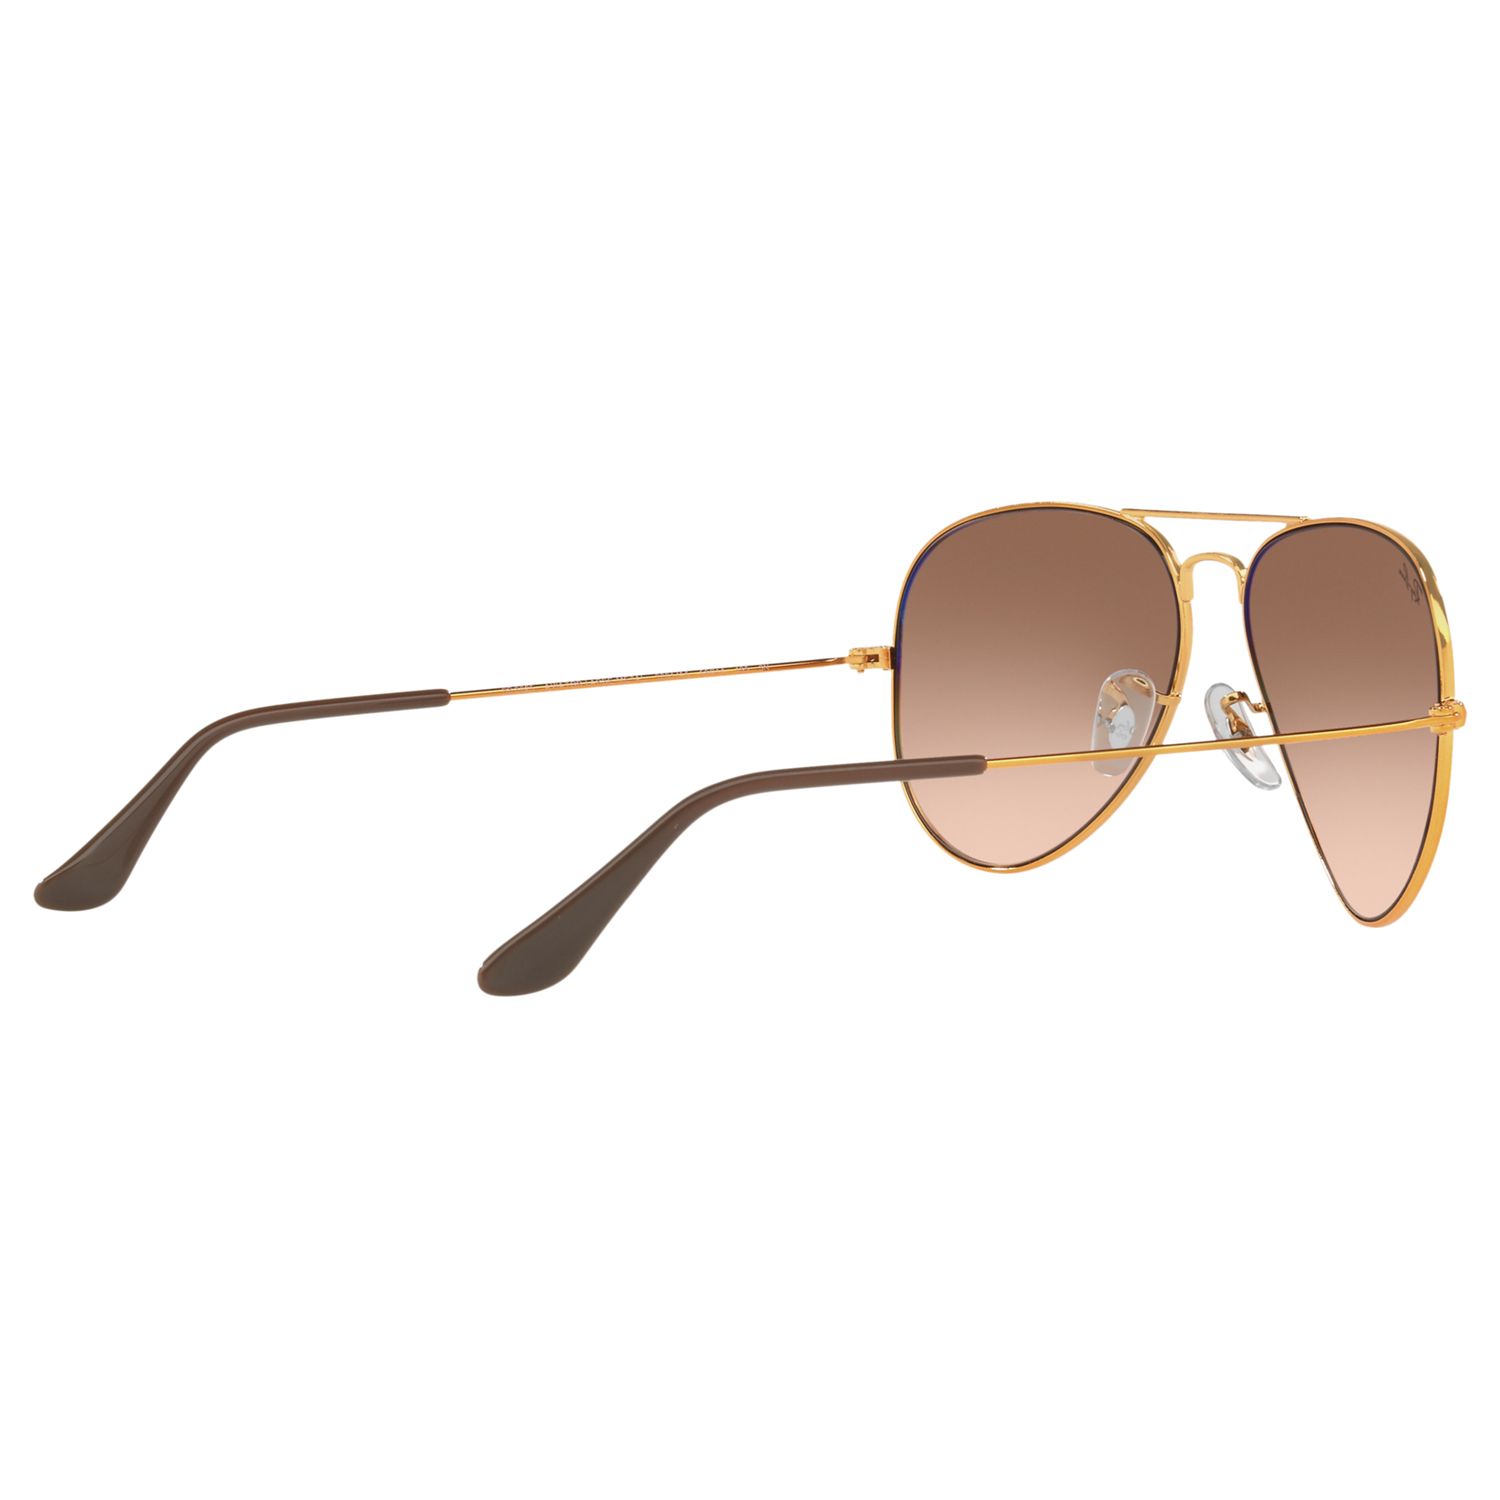 Ray-Ban RB3025 Unisex Aviator Sunglasses, Gold/Brown Gradient